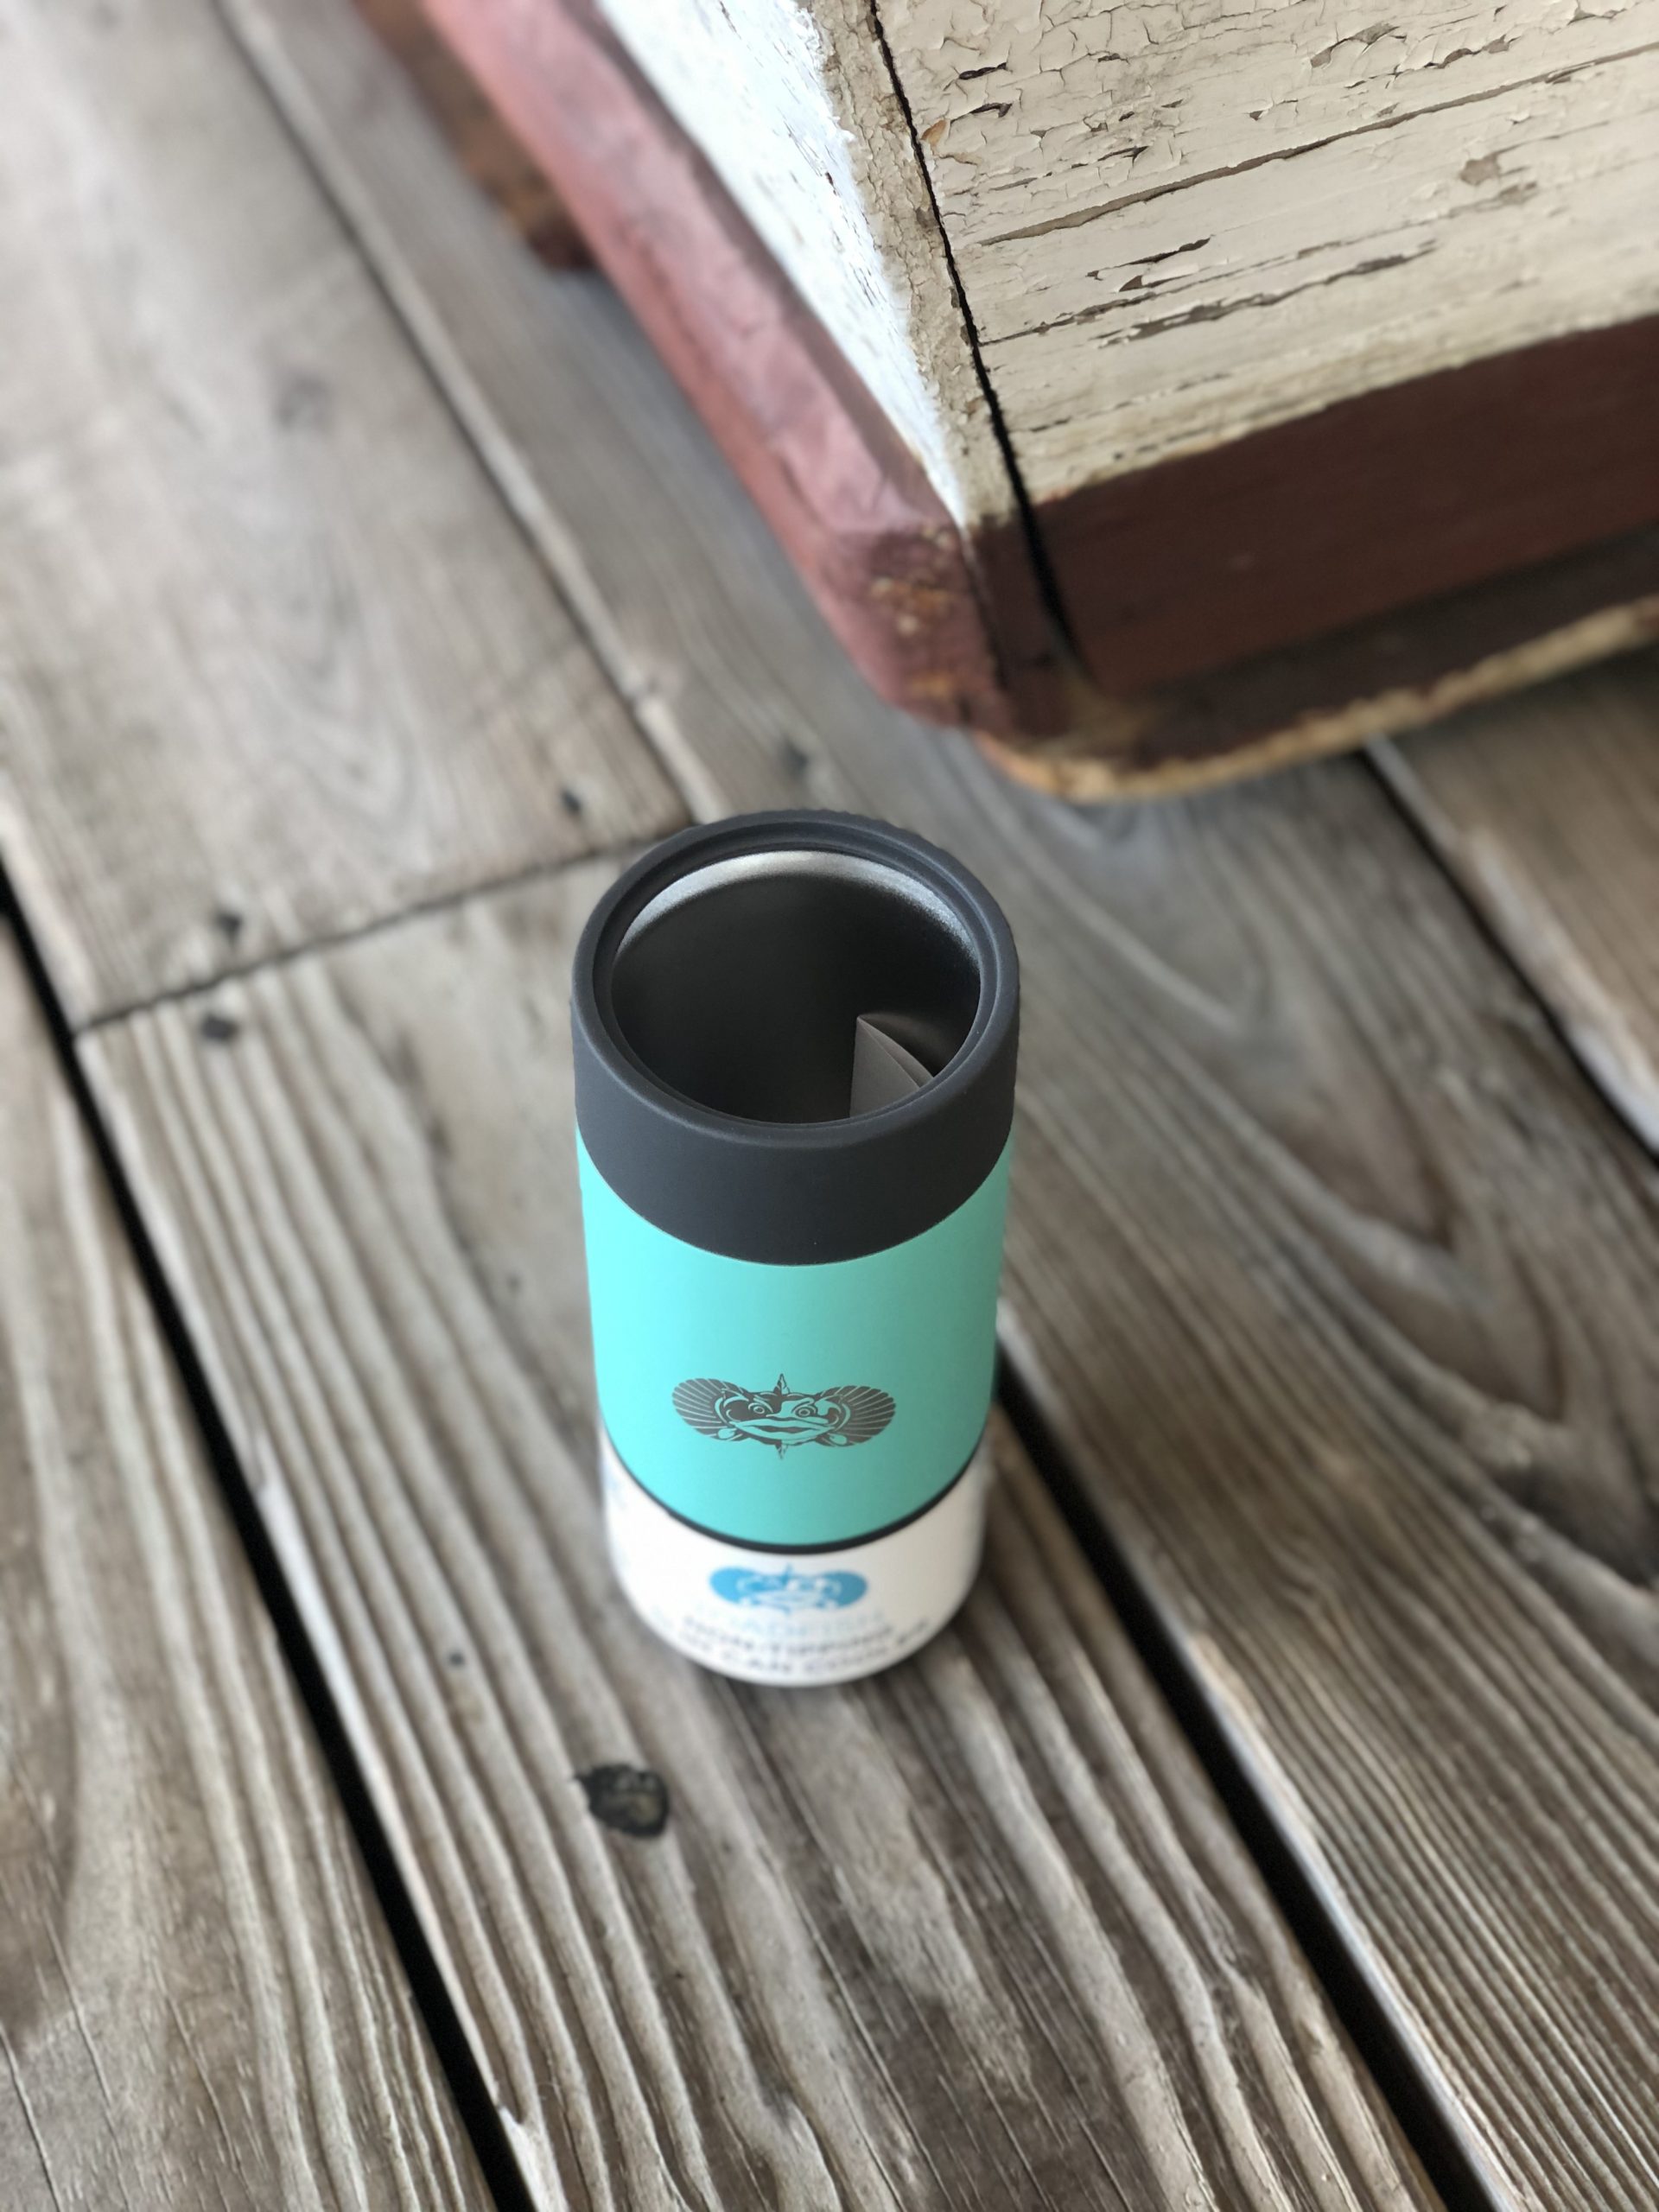 Non-Tipping 12oz Slim Can Cooler